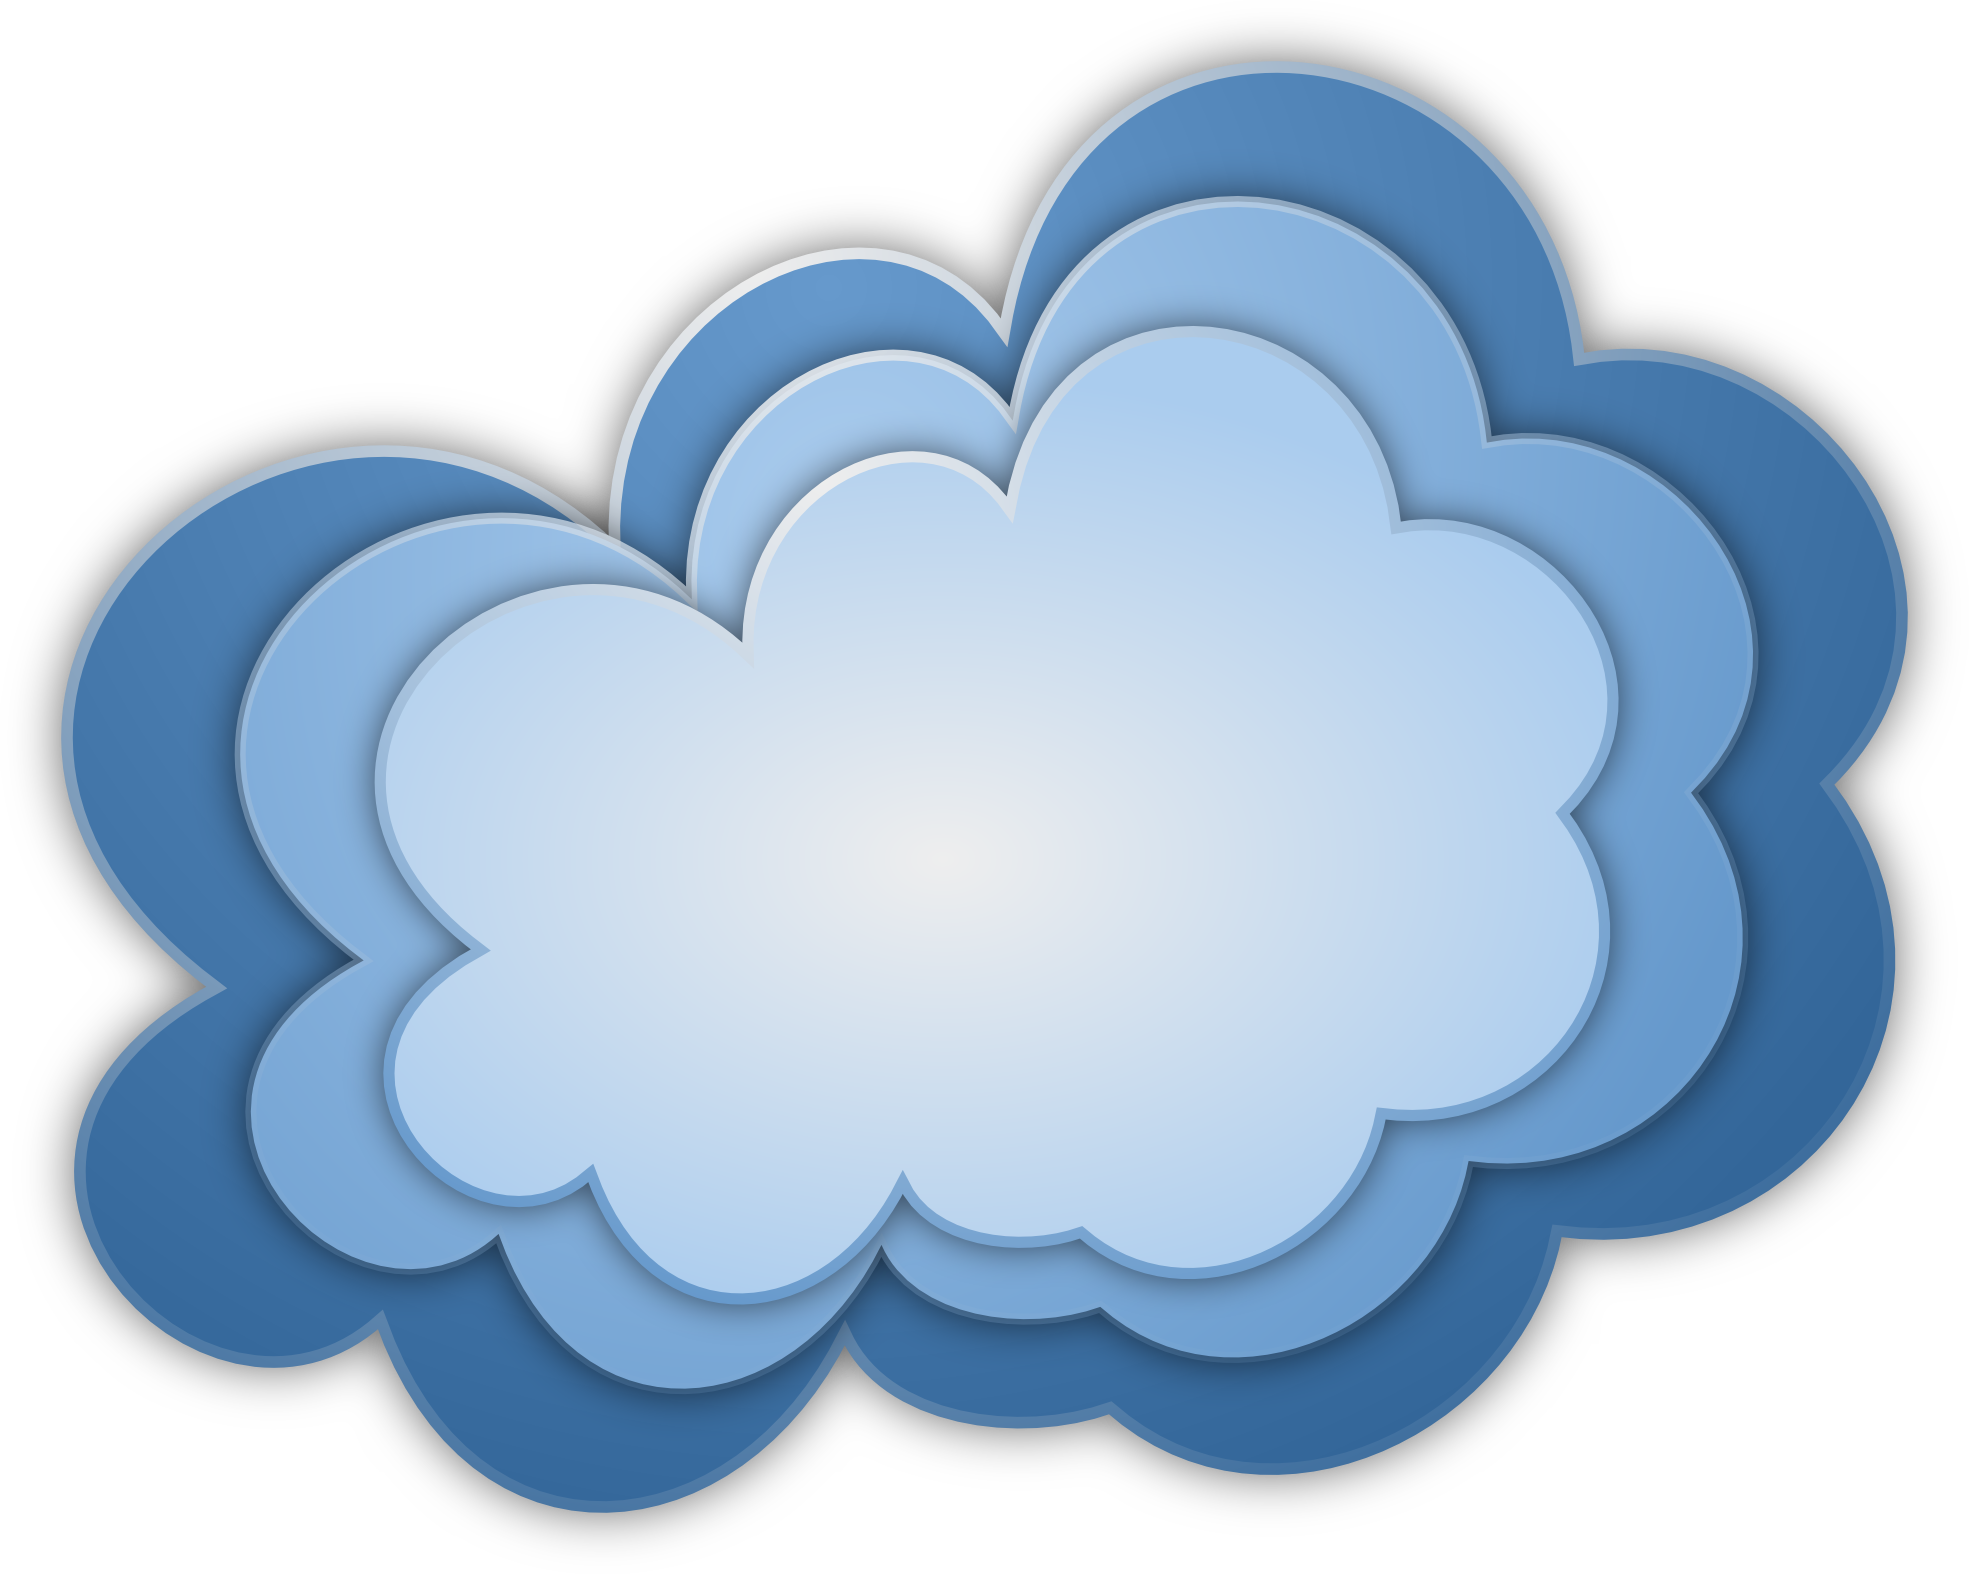 Free Cloud Vector Png, Download Free Cloud Vector Png png images, Free ...